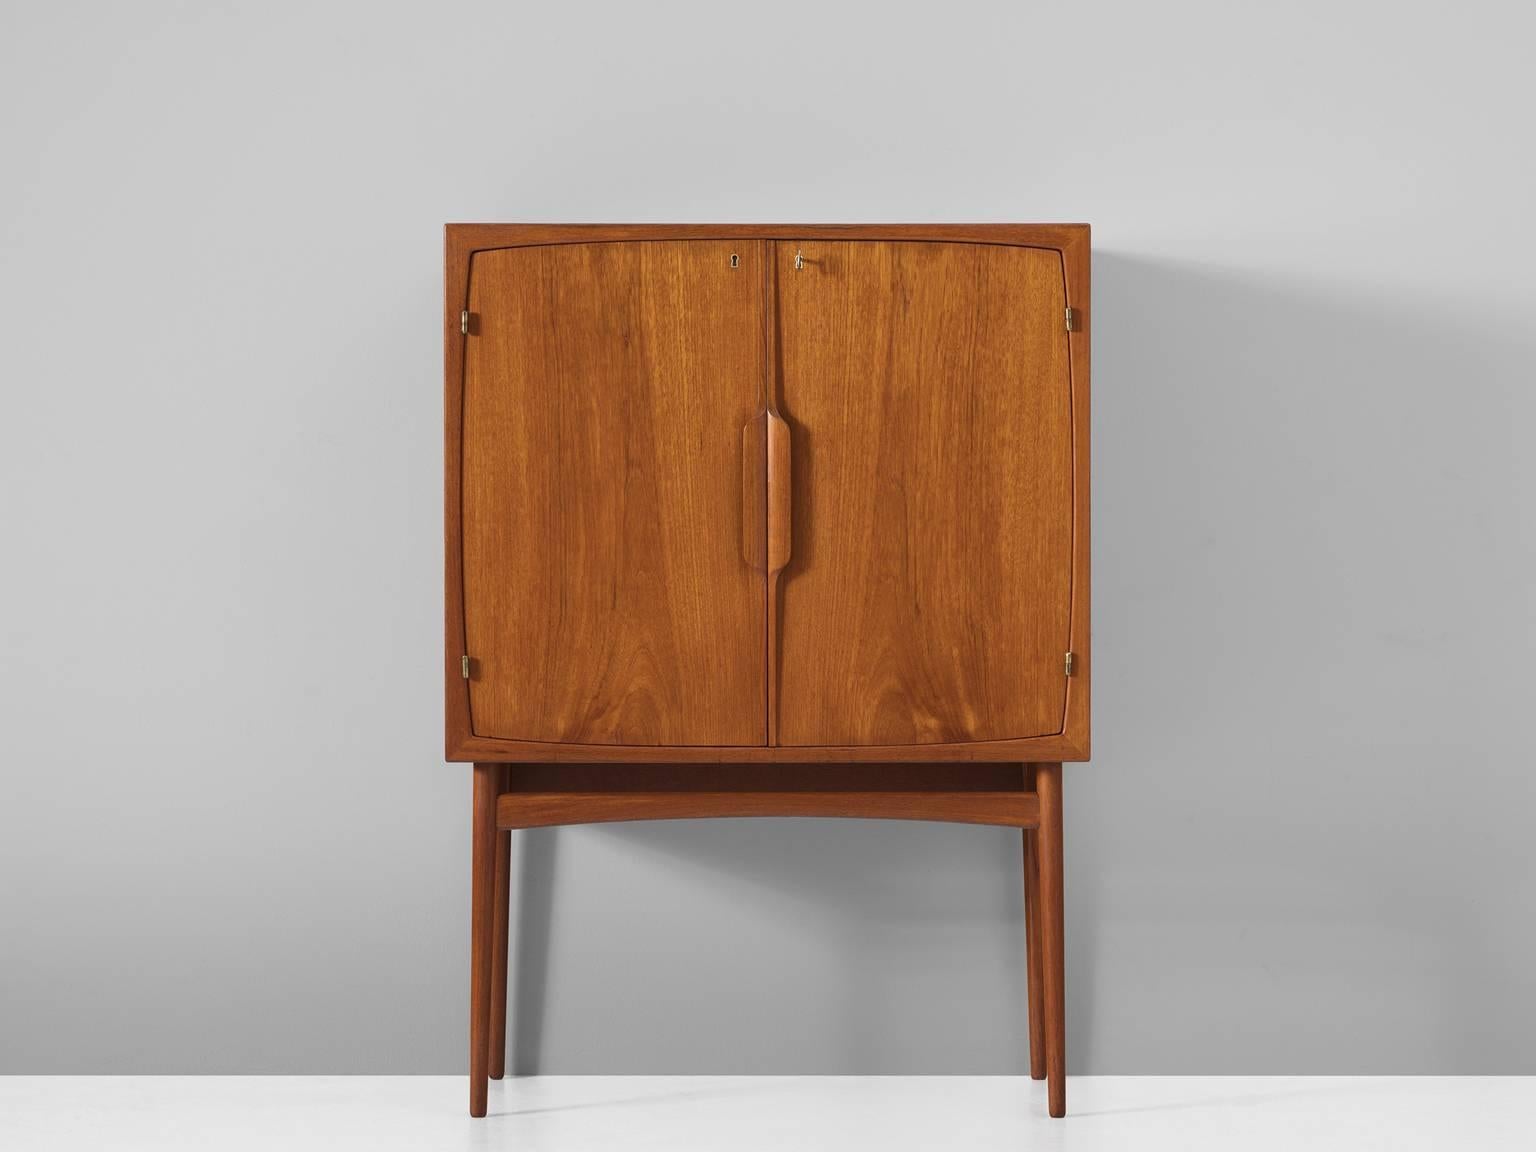 Dry bar model Bacchus, in teak, glass and brass, by Torbjorn Afdal for Mellemstrands MøbelfabrikNorway, 1950s.

This well preserved small bar cabinet is a beautiful example of Scandinavian craftsmanship. The design is basic yet refined. The bar